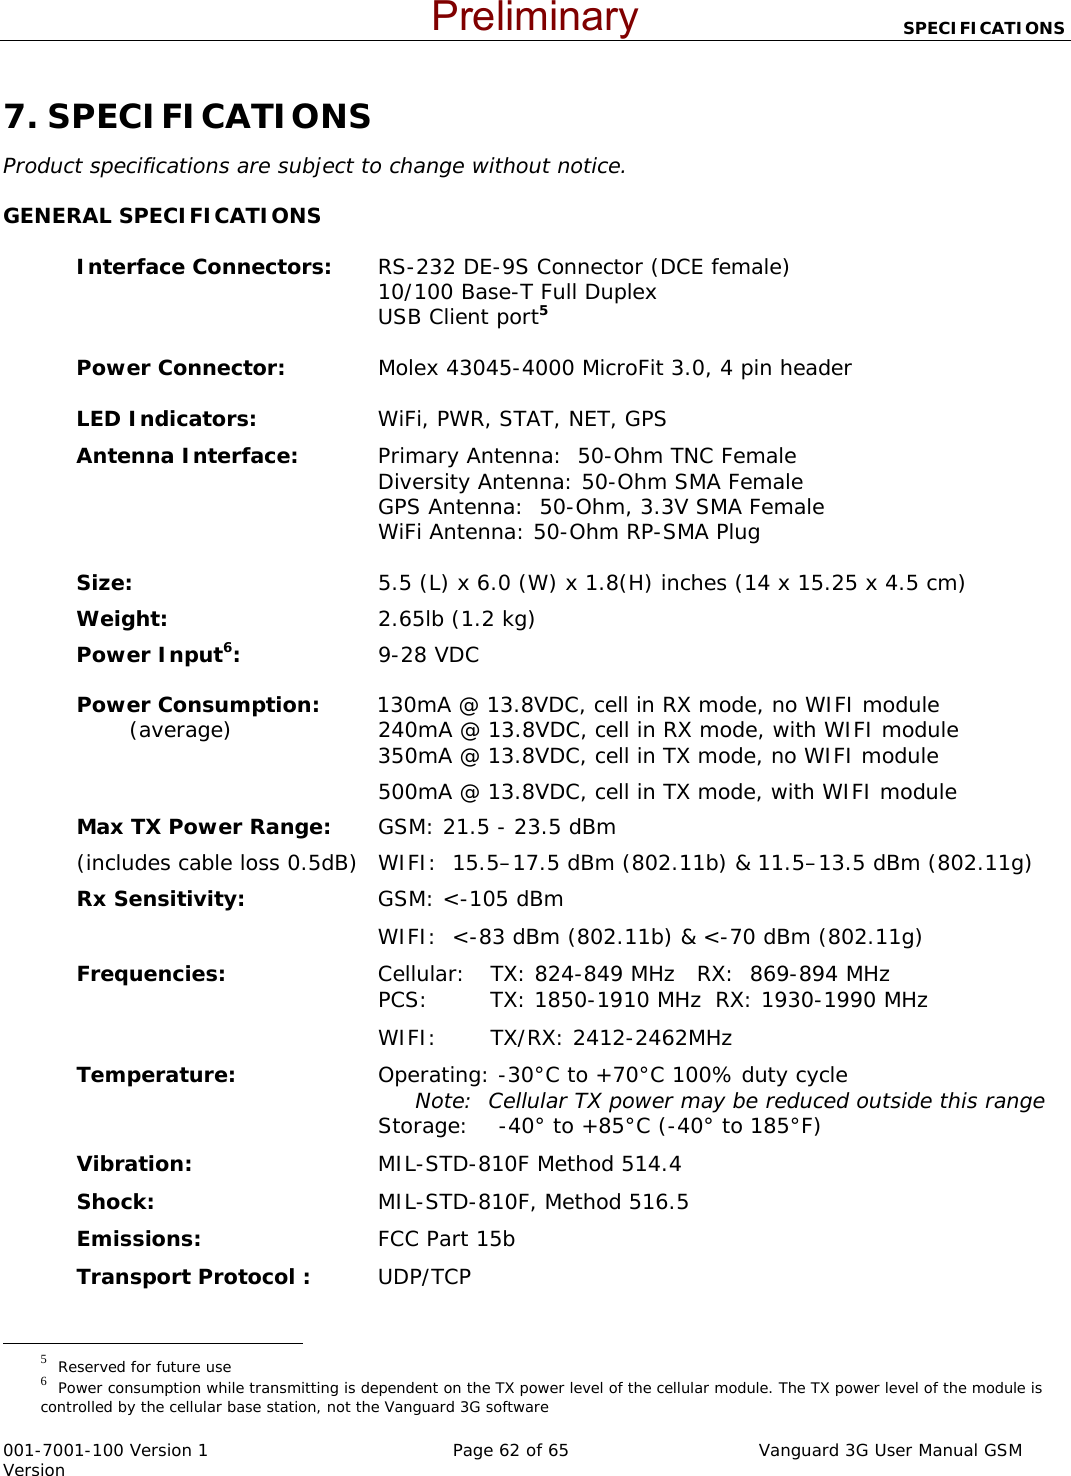                            SPECIFICATIONS  001-7001-100 Version 1       Page 62 of 65       Vanguard 3G User Manual GSM Version 7. SPECIFICATIONS Product specifications are subject to change without notice. GENERAL SPECIFICATIONS  Interface Connectors:  RS-232 DE-9S Connector (DCE female)  10/100 Base-T Full Duplex   USB Client port5  Power Connector:  Molex 43045-4000 MicroFit 3.0, 4 pin header  LED Indicators:  WiFi, PWR, STAT, NET, GPS Antenna Interface:   Primary Antenna:  50-Ohm TNC Female  Diversity Antenna: 50-Ohm SMA Female   GPS Antenna:  50-Ohm, 3.3V SMA Female   WiFi Antenna: 50-Ohm RP-SMA Plug   Size:  5.5 (L) x 6.0 (W) x 1.8(H) inches (14 x 15.25 x 4.5 cm) Weight:   2.65lb (1.2 kg) Power Input6:   9-28 VDC   Power Consumption:        130mA @ 13.8VDC, cell in RX mode, no WIFI module           (average)  240mA @ 13.8VDC, cell in RX mode, with WIFI module  350mA @ 13.8VDC, cell in TX mode, no WIFI module   500mA @ 13.8VDC, cell in TX mode, with WIFI module Max TX Power Range:  GSM: 21.5 - 23.5 dBm   (includes cable loss 0.5dB)   WIFI:  15.5–17.5 dBm (802.11b) &amp; 11.5–13.5 dBm (802.11g) Rx Sensitivity:  GSM: &lt;-105 dBm   WIFI:  &lt;-83 dBm (802.11b) &amp; &lt;-70 dBm (802.11g) Frequencies:  Cellular:  TX: 824-849 MHz  RX:  869-894 MHz   PCS:  TX: 1850-1910 MHz  RX: 1930-1990 MHz  WIFI: TX/RX: 2412-2462MHz Temperature:  Operating: -30°C to +70°C 100% duty cycle   Note:  Cellular TX power may be reduced outside this range   Storage:    -40° to +85°C (-40° to 185°F) Vibration:    MIL-STD-810F Method 514.4 Shock:  MIL-STD-810F, Method 516.5 Emissions:  FCC Part 15b  Transport Protocol : UDP/TCP                                                  5  Reserved for future use 6  Power consumption while transmitting is dependent on the TX power level of the cellular module. The TX power level of the module is controlled by the cellular base station, not the Vanguard 3G software   Preliminary